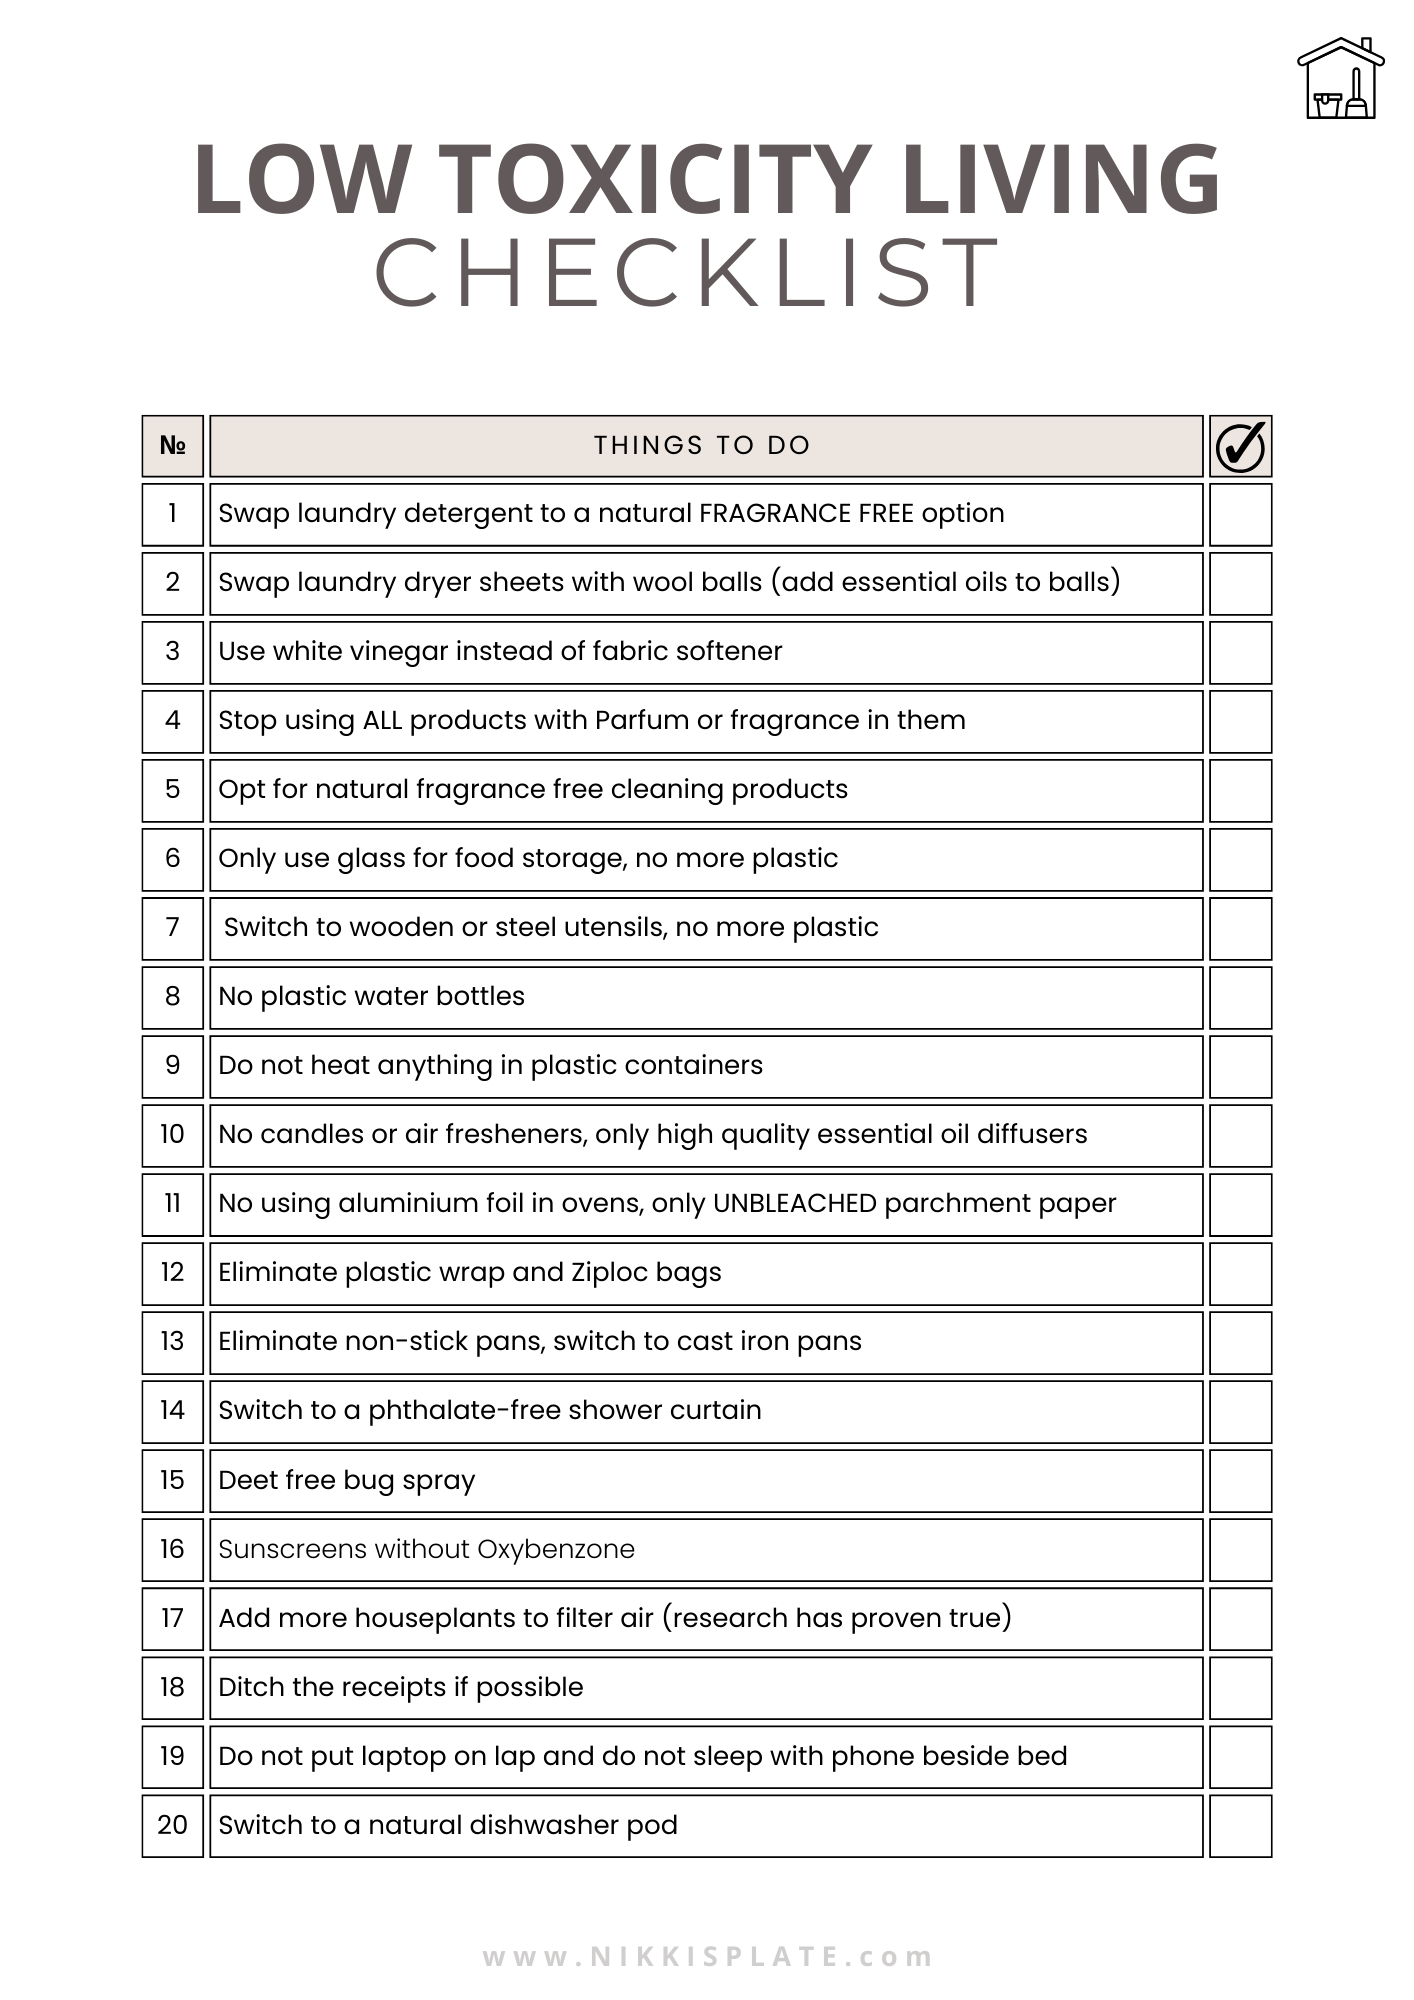 Get your hands on my FREE printable Non-Toxic Living Starter Checklist. It’s like a treasure map guiding you to a lifestyle free of harmful chemicals. Start your journey today – after all, we're only one checklist away from creating a safer, happier home. Say 'bye-bye' to toxins and 'hello' to healthier living!